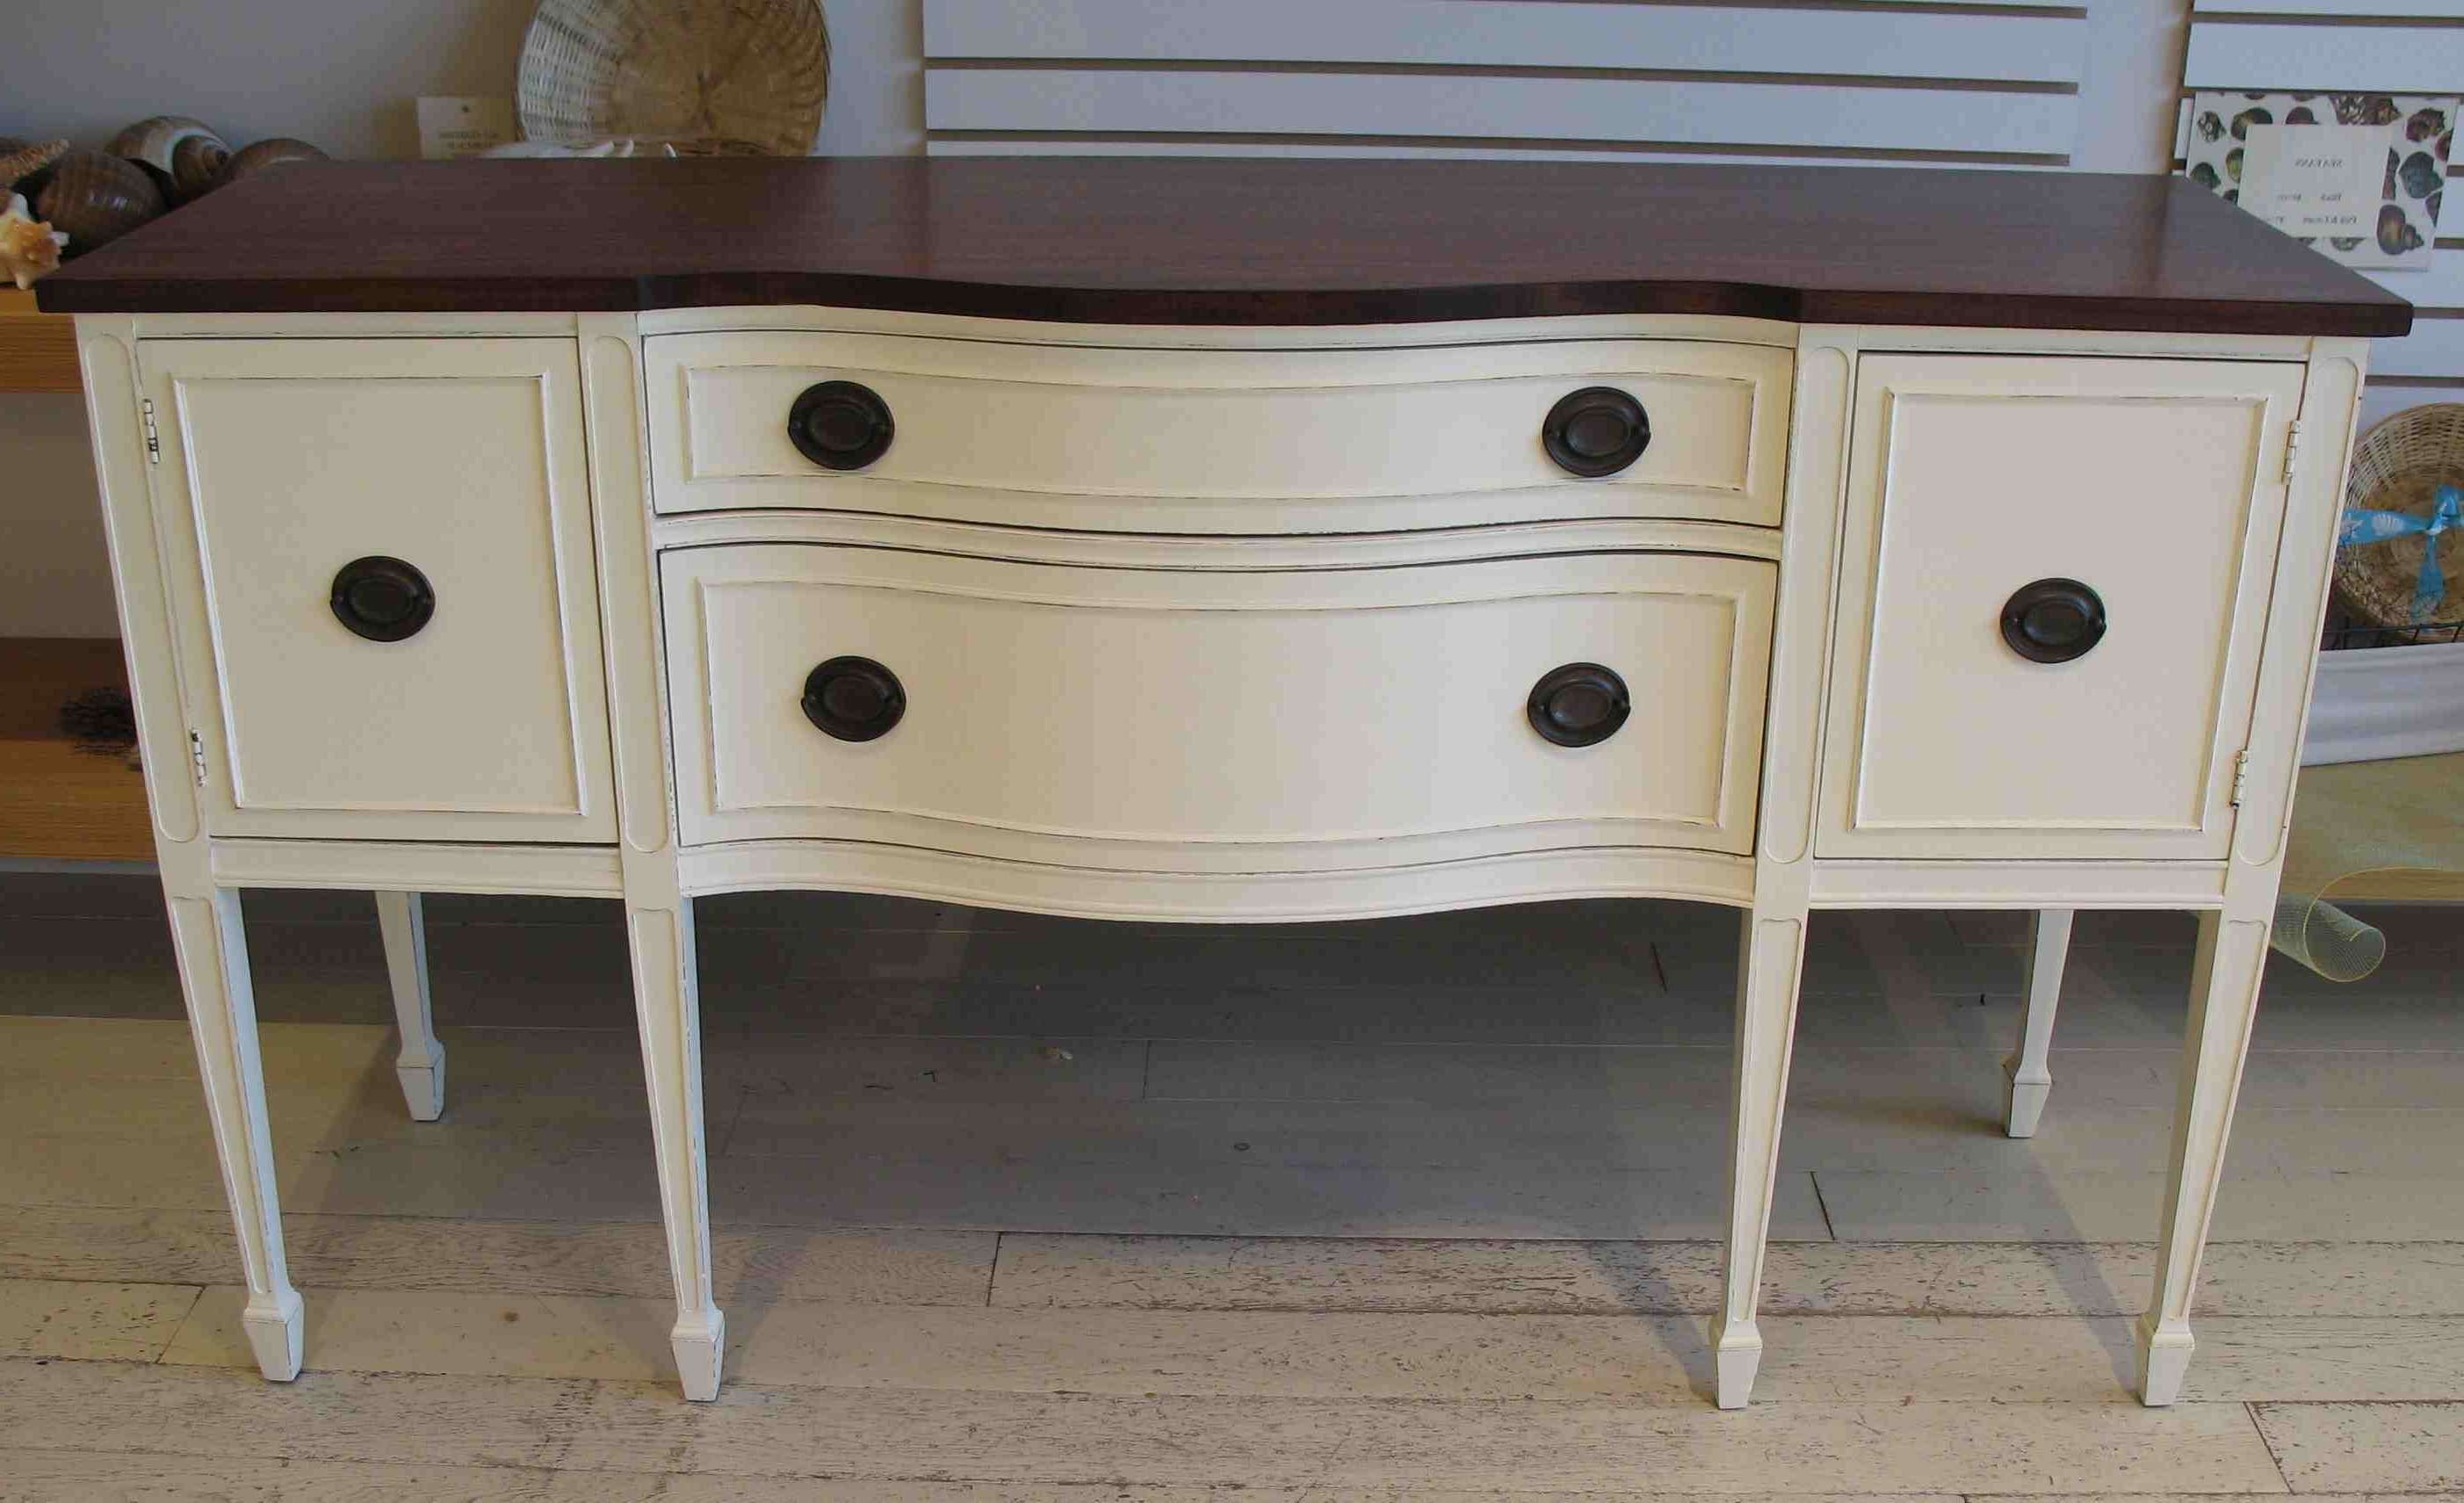 Using Old Oak Sideboard Buffet » Home Decorations Insight Intended For Sideboards Buffet Tables (View 8 of 20)